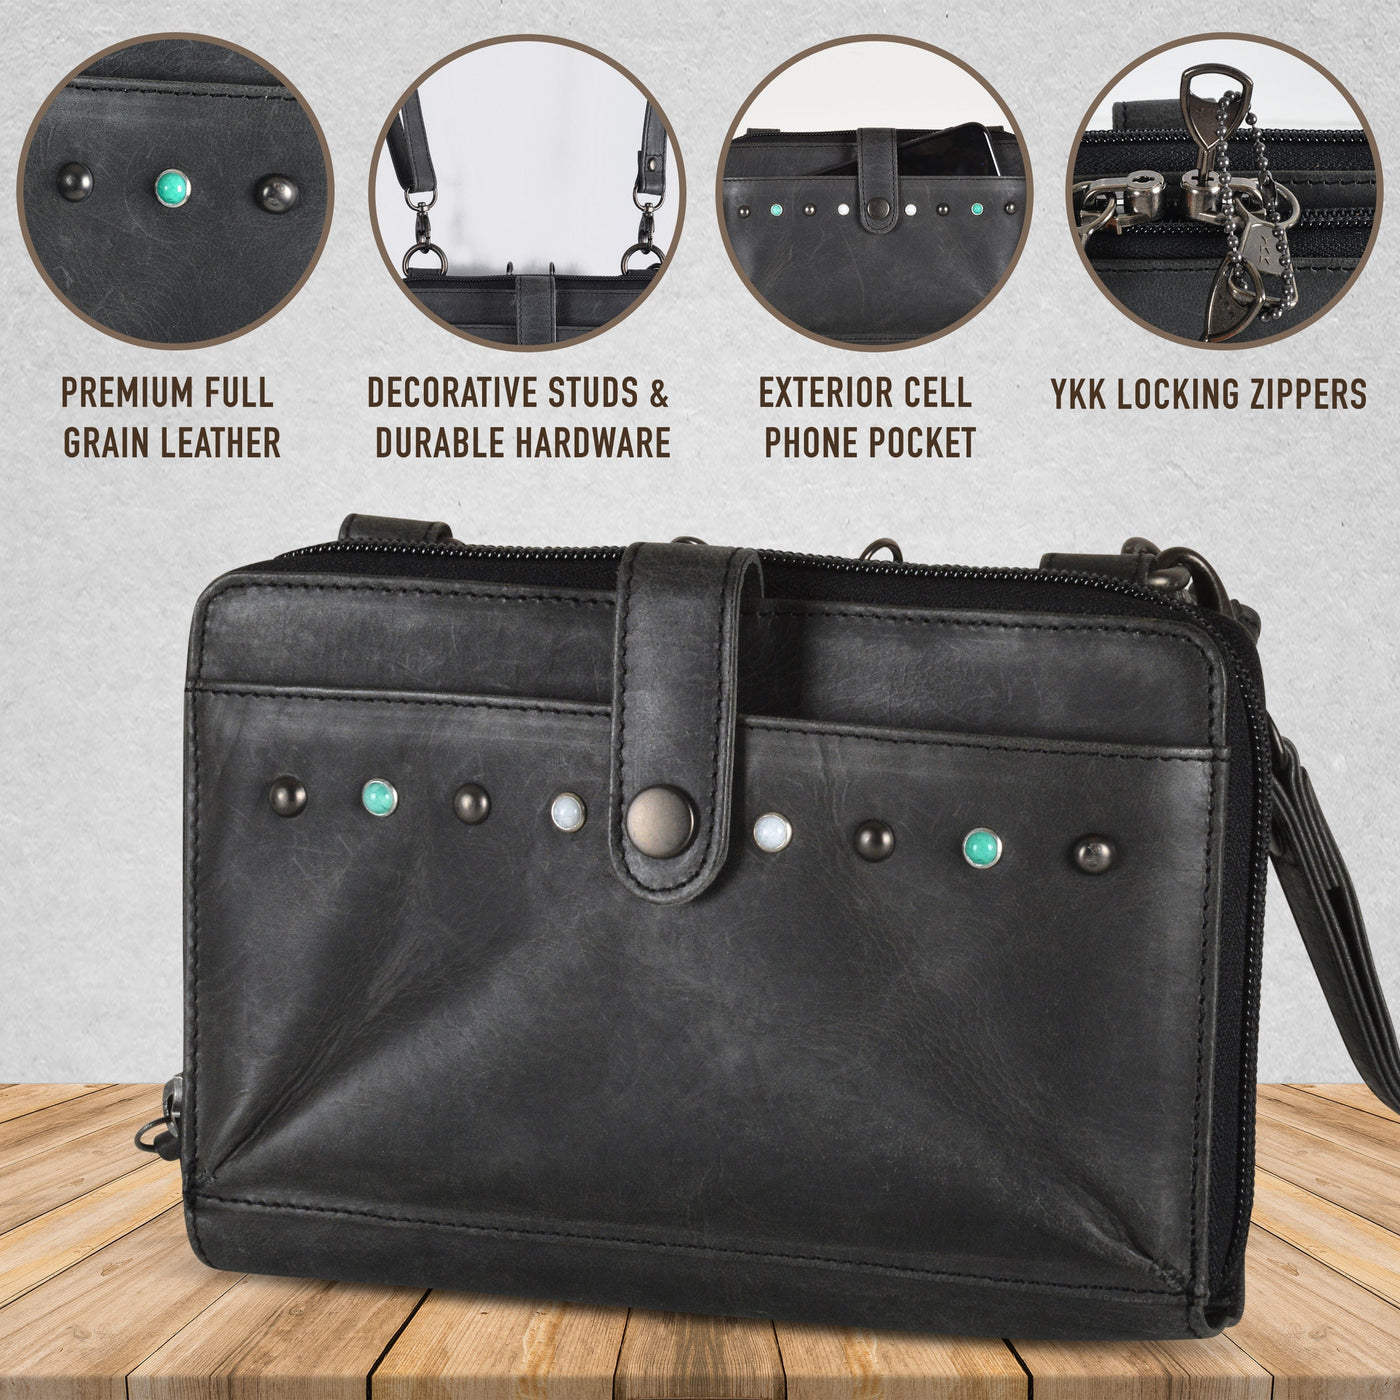 Concealed Carry Millie Leather Crossbody Organizer - Lady Conceal -  concealed carry backpack -  concealed carry shoulder bag -  concealed carry purse genuine leather -  concealed carry purse designer -  concealed carry purse small -  concealed carry crossbody bag -  concealed carry purse crossbody - small crossbody bags -  women's small crossbody bags - 